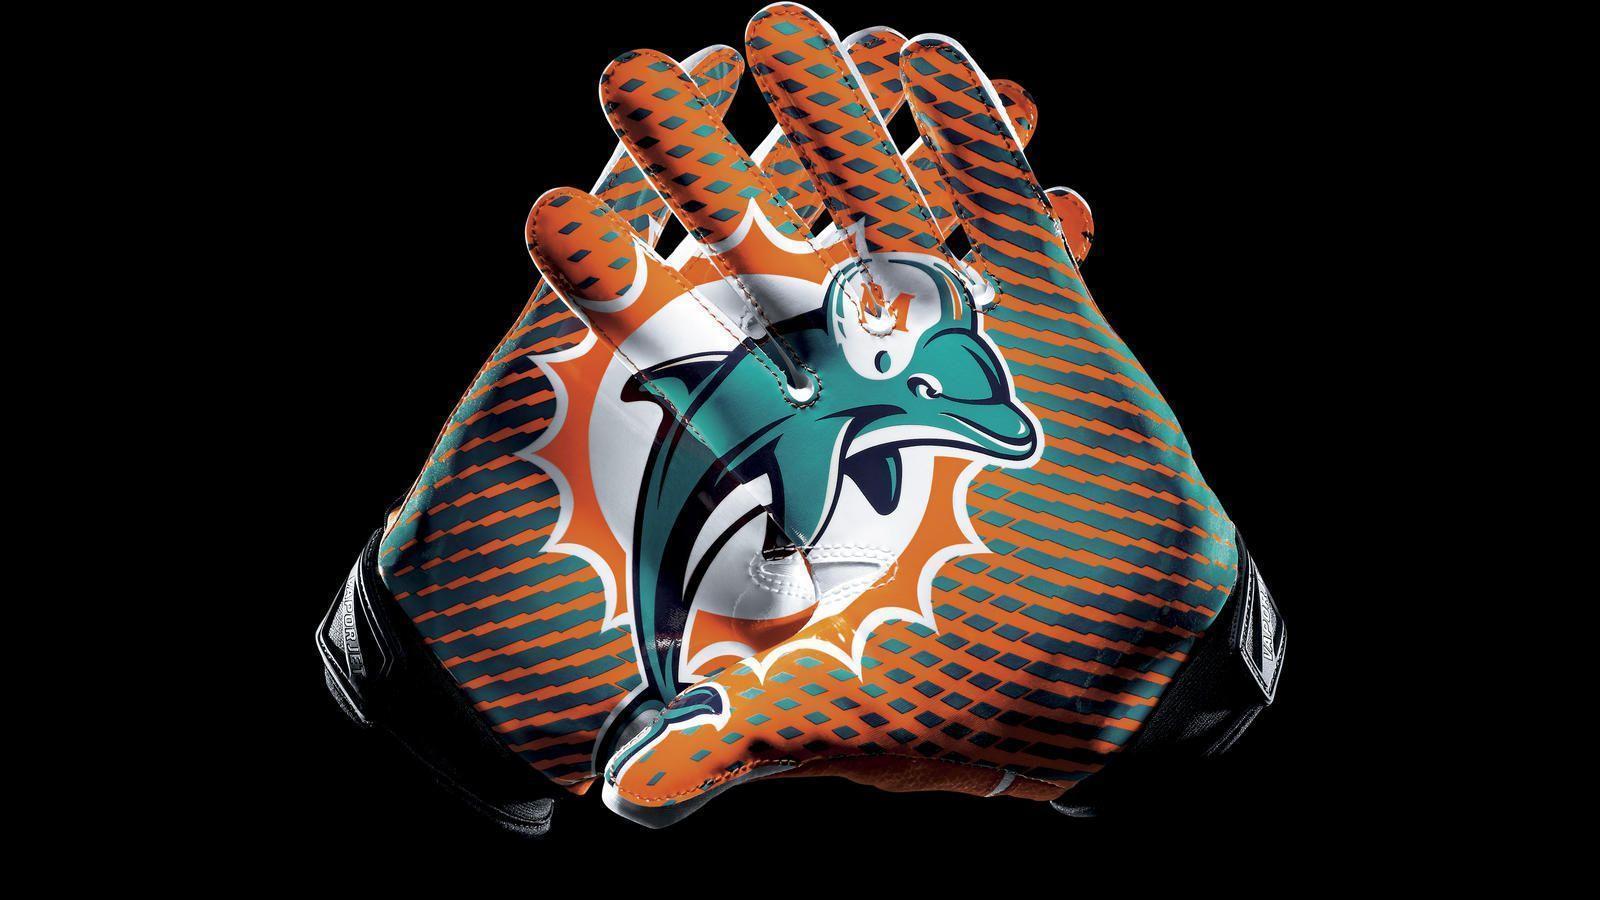 Download free miami dolphins wallpaper for your mobile phone